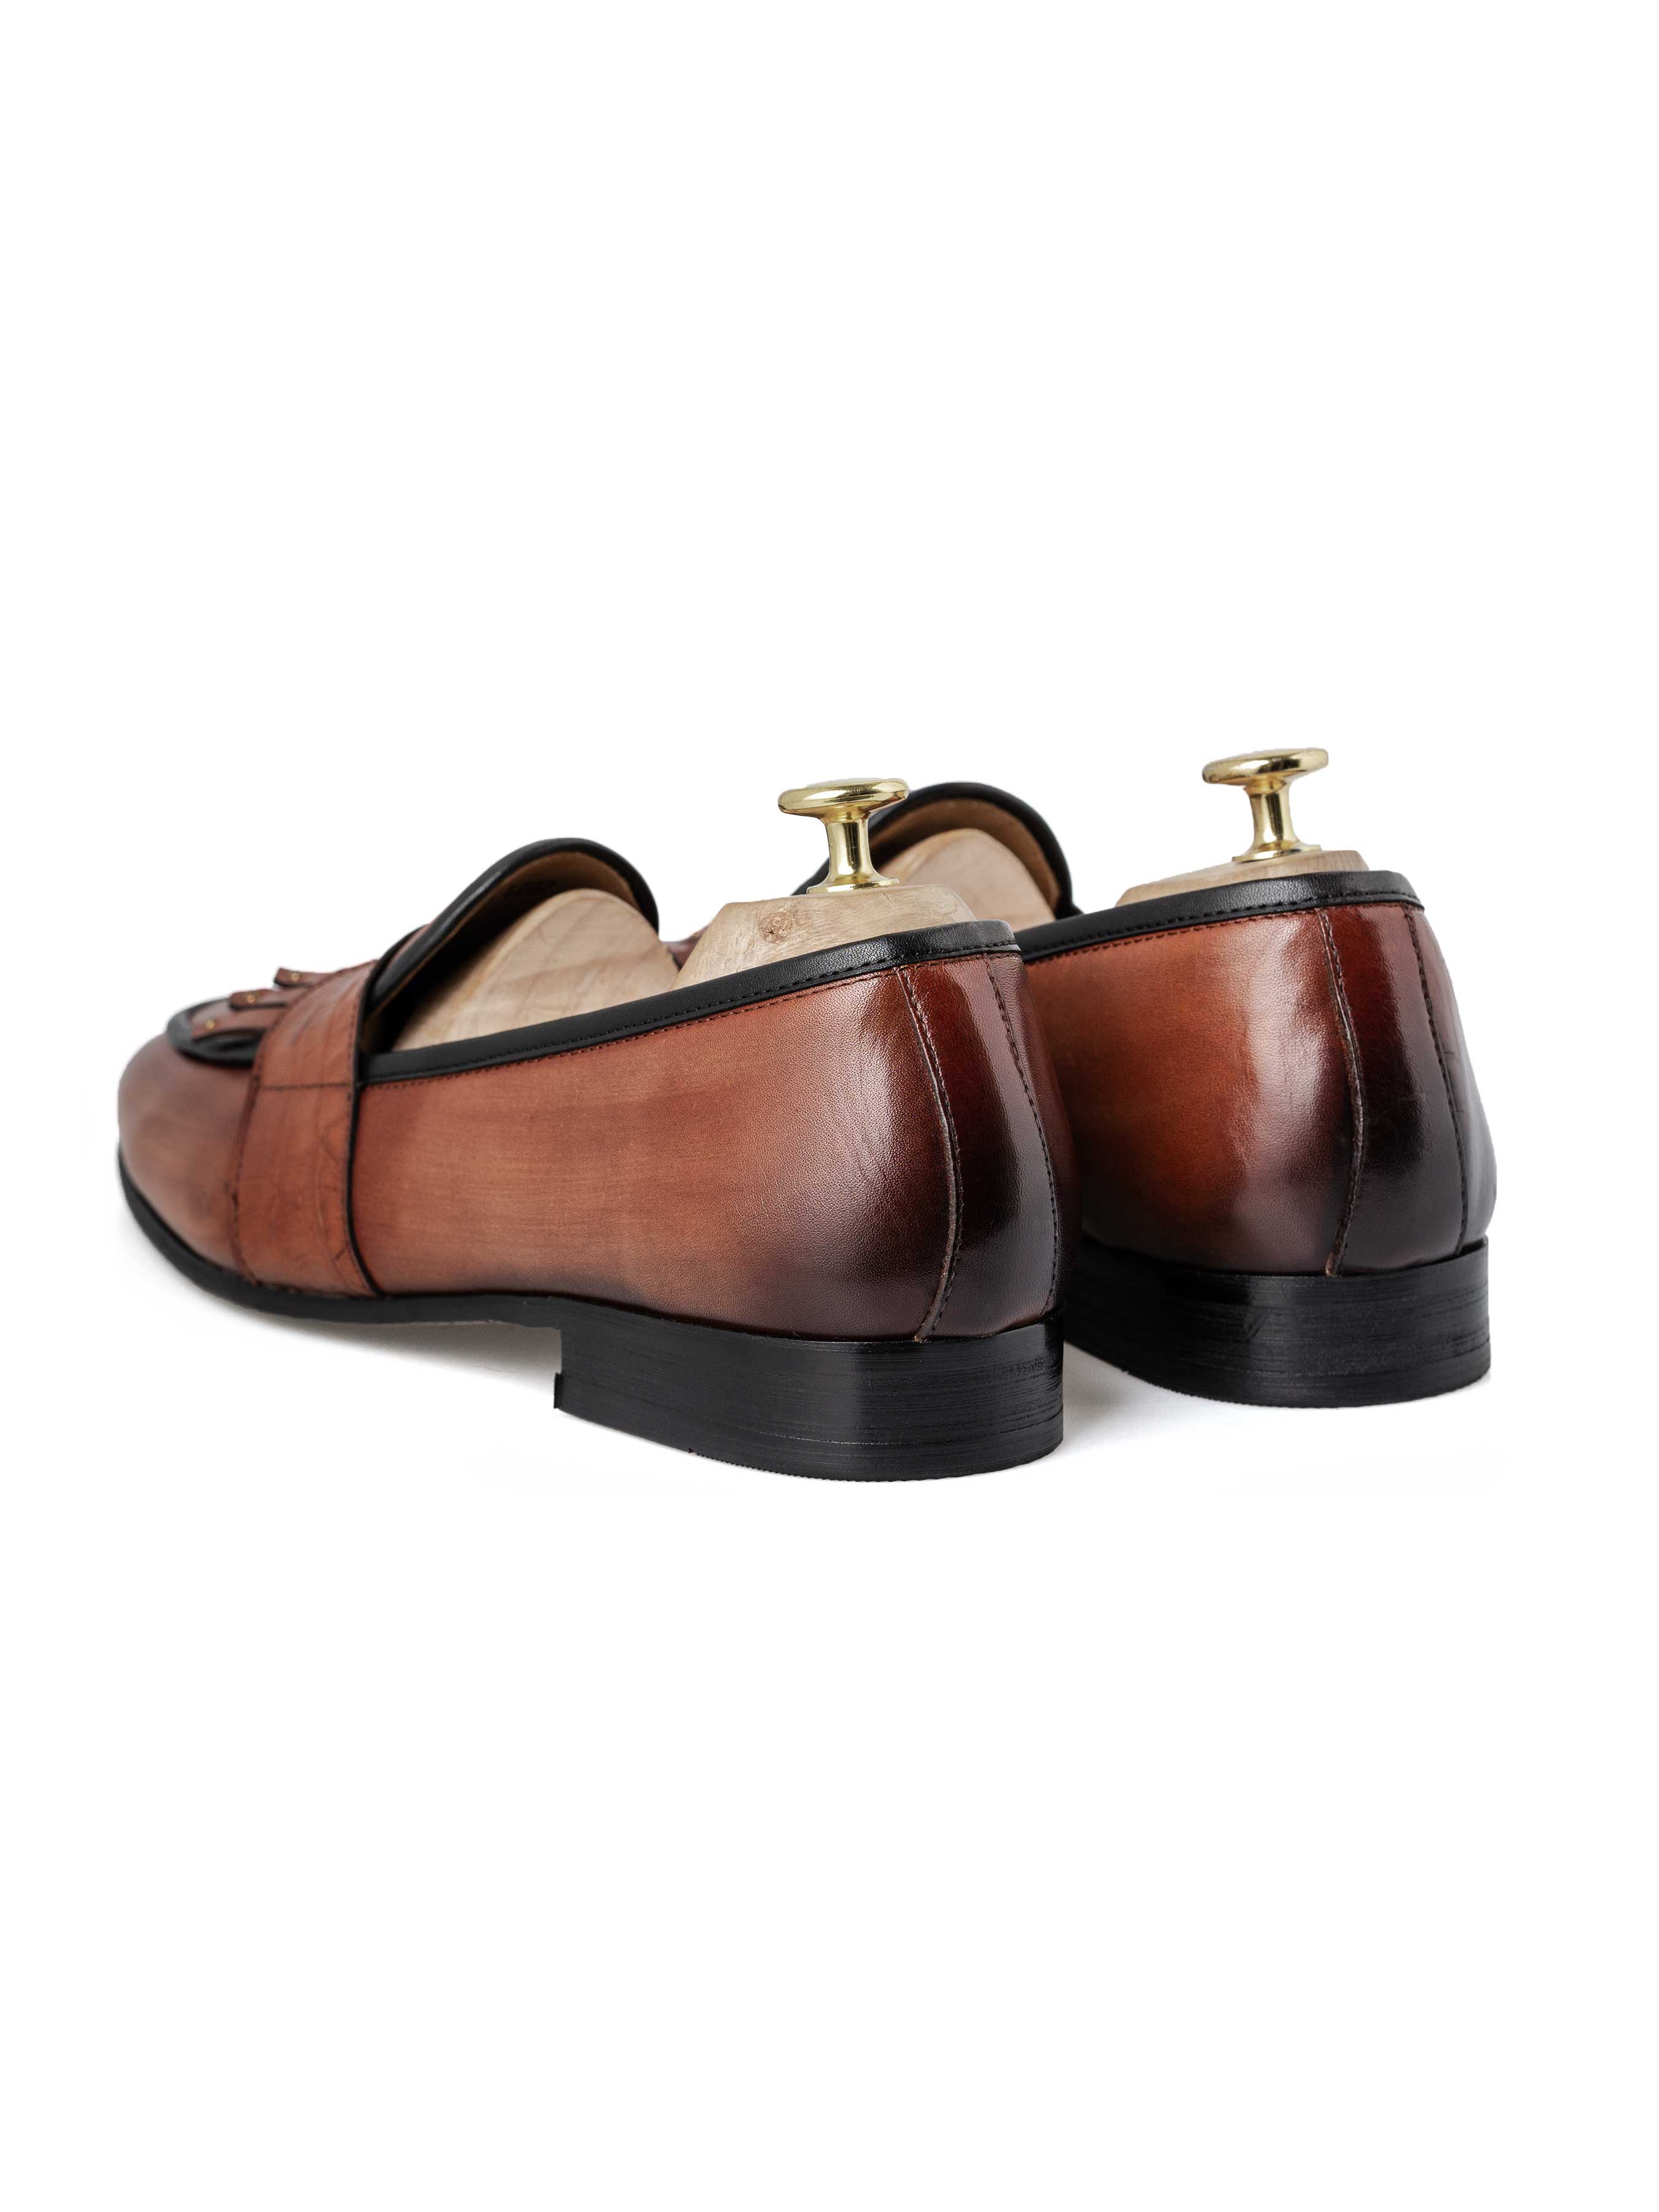 Belgian Loafer - Cognac Tan Phyton Penny Strap with Studded Fringe (Hand Painted Patina) - Zeve Shoes